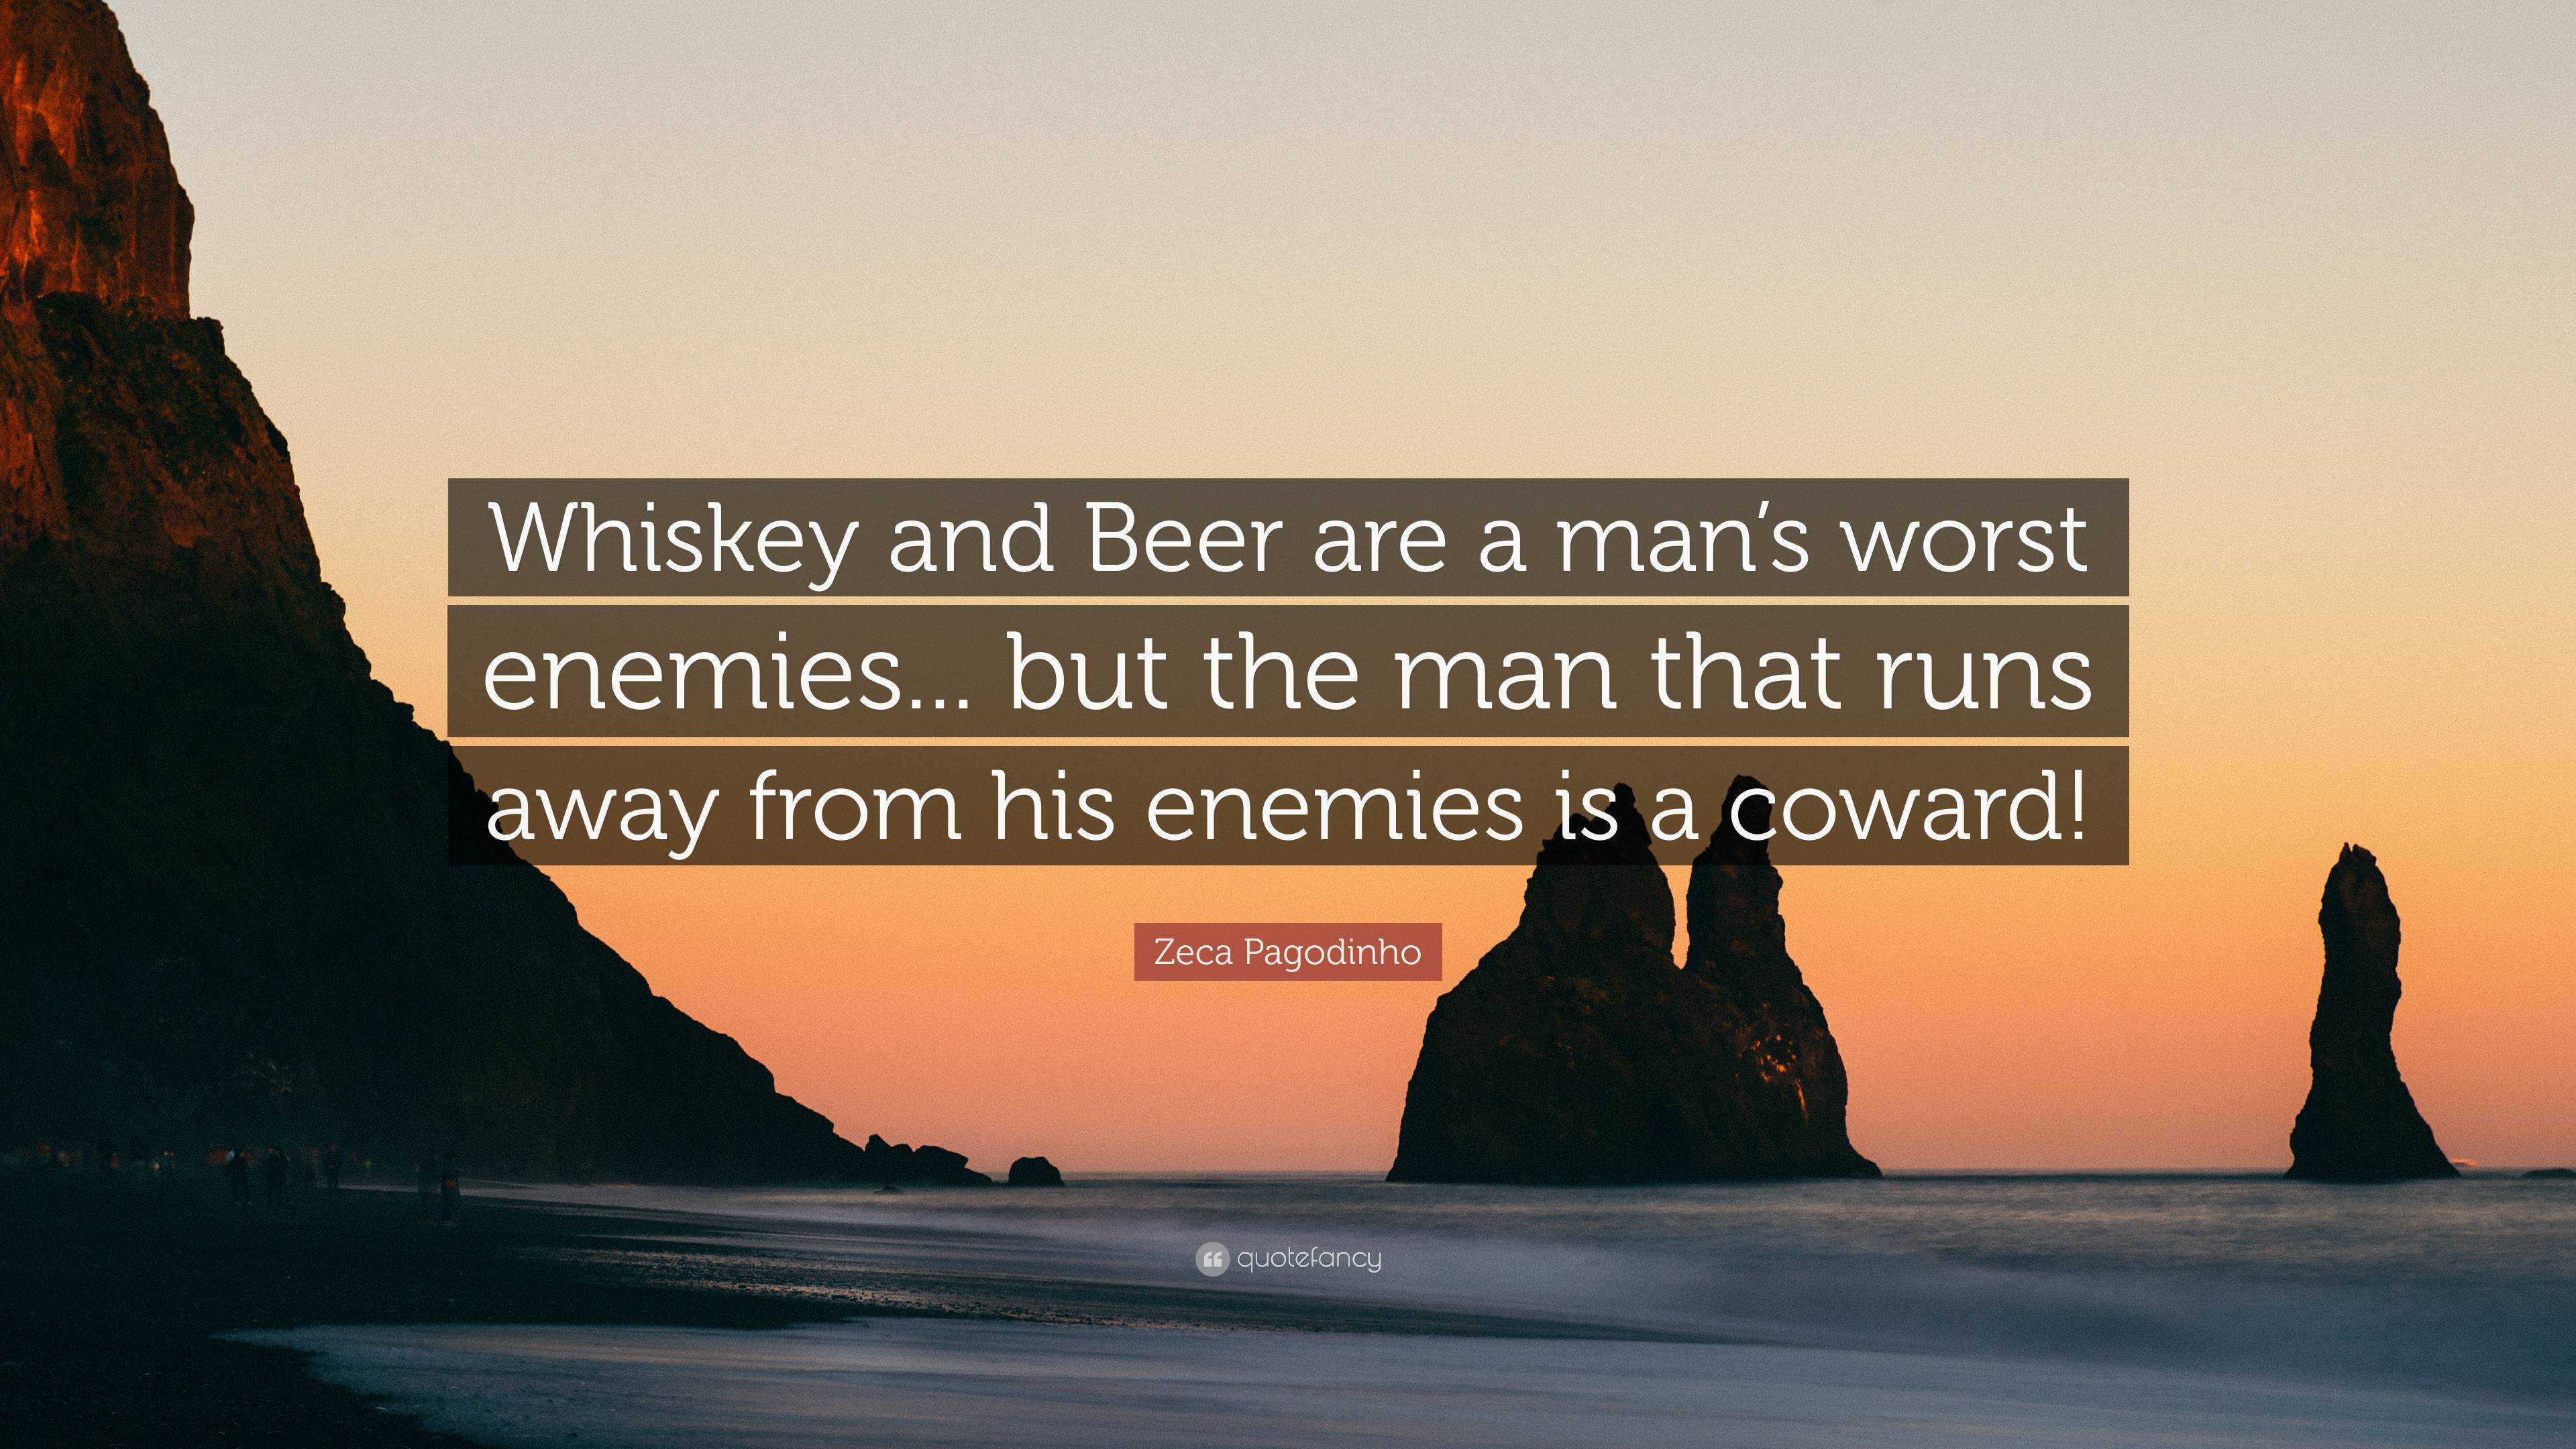 Beer is NOT the enemy.